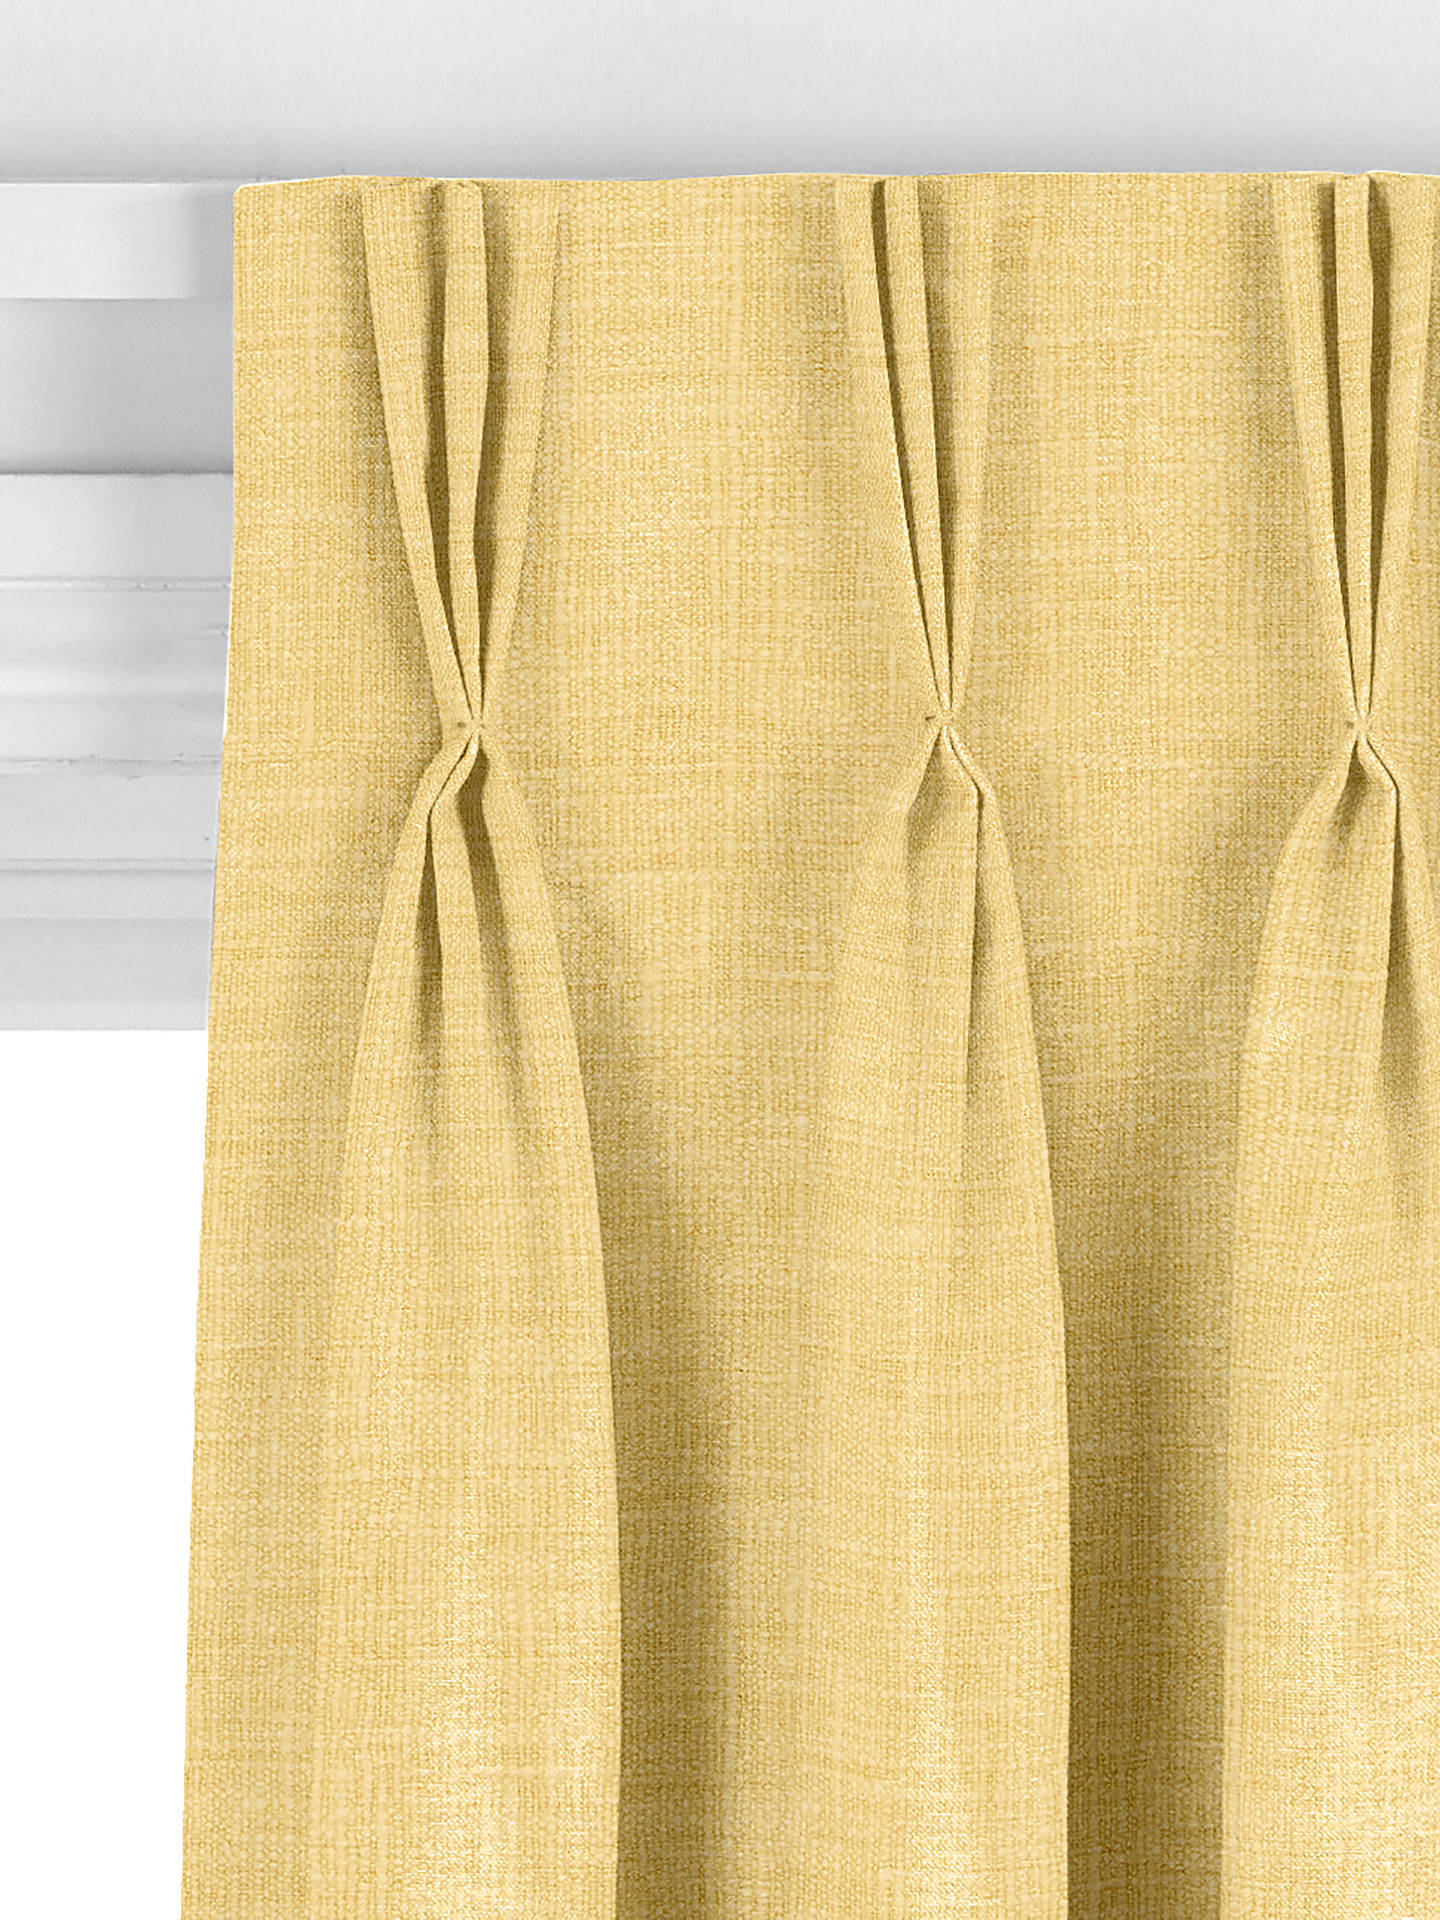 John Lewis Cotton Blend Made to Measure Curtains, Yellow